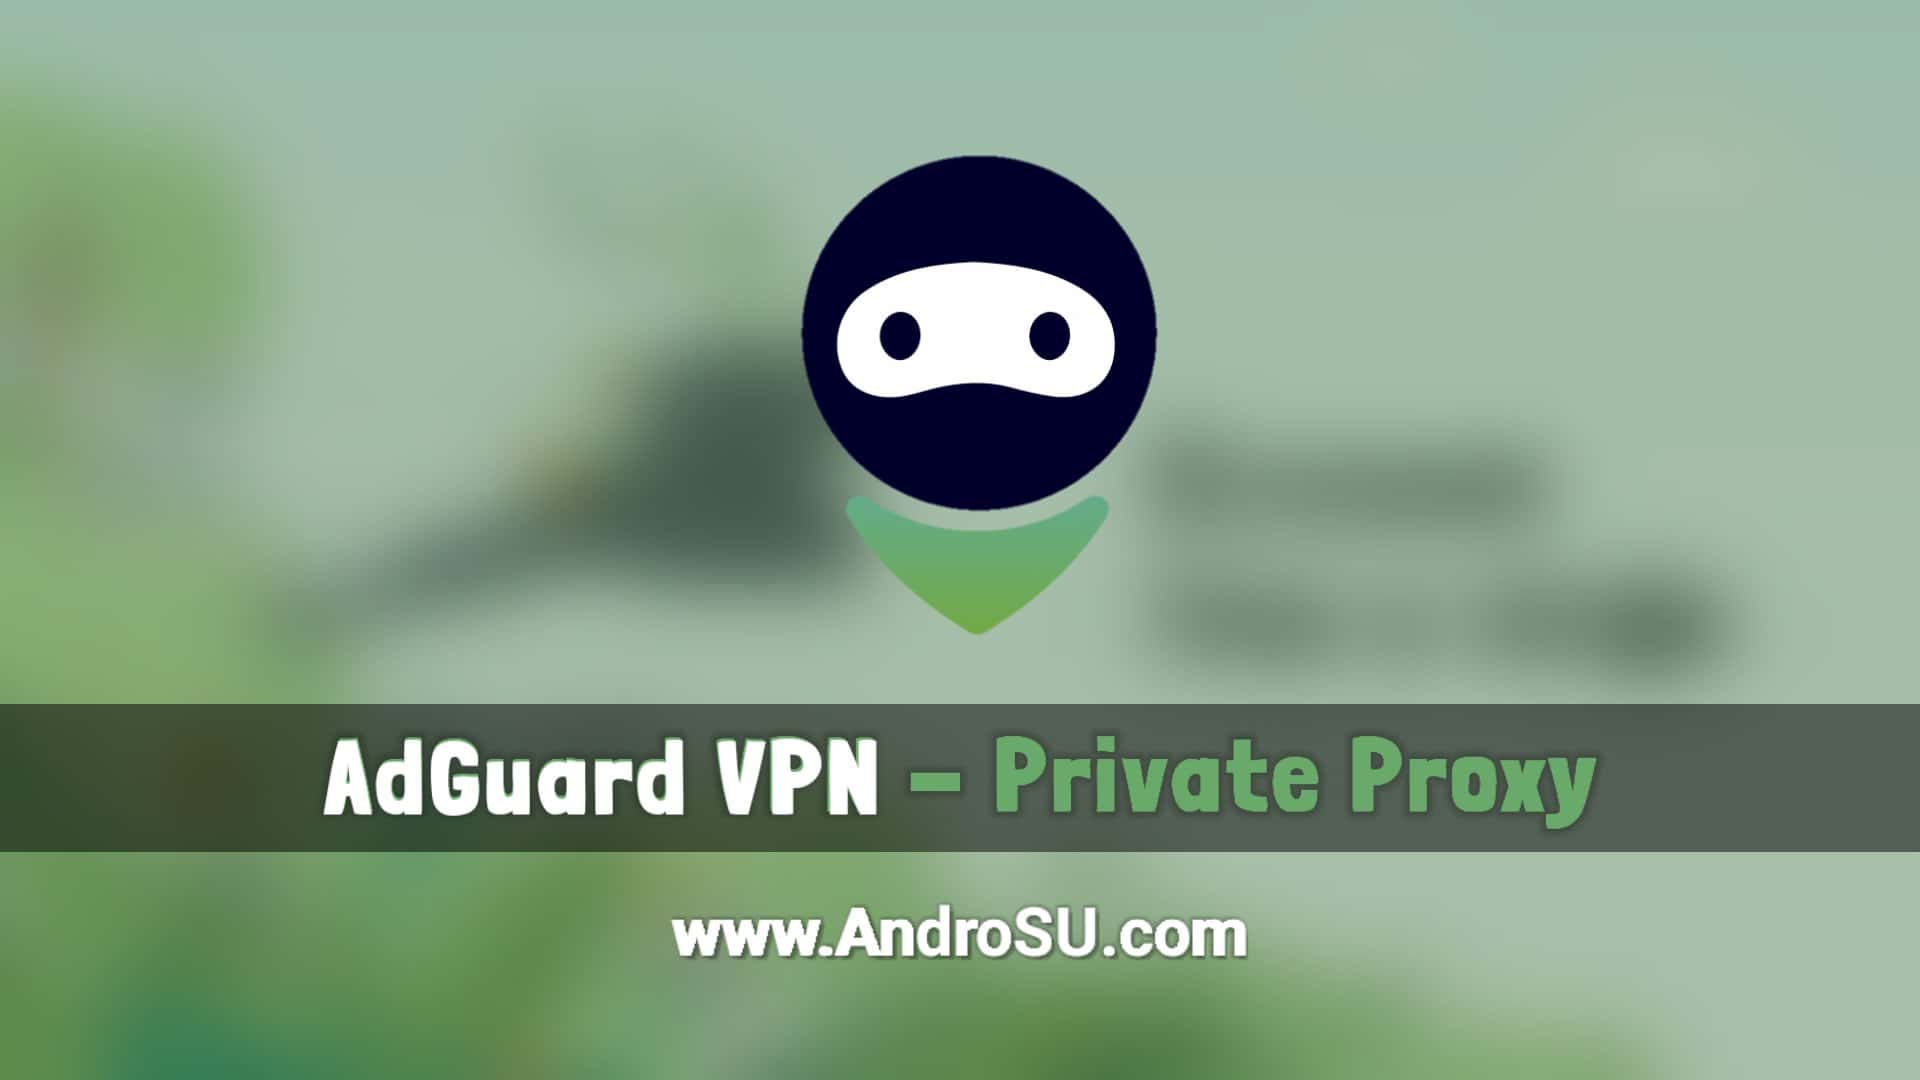 AdGuard VPN APK, AdGuard VPN Mod APK, AdGuard VPN Android